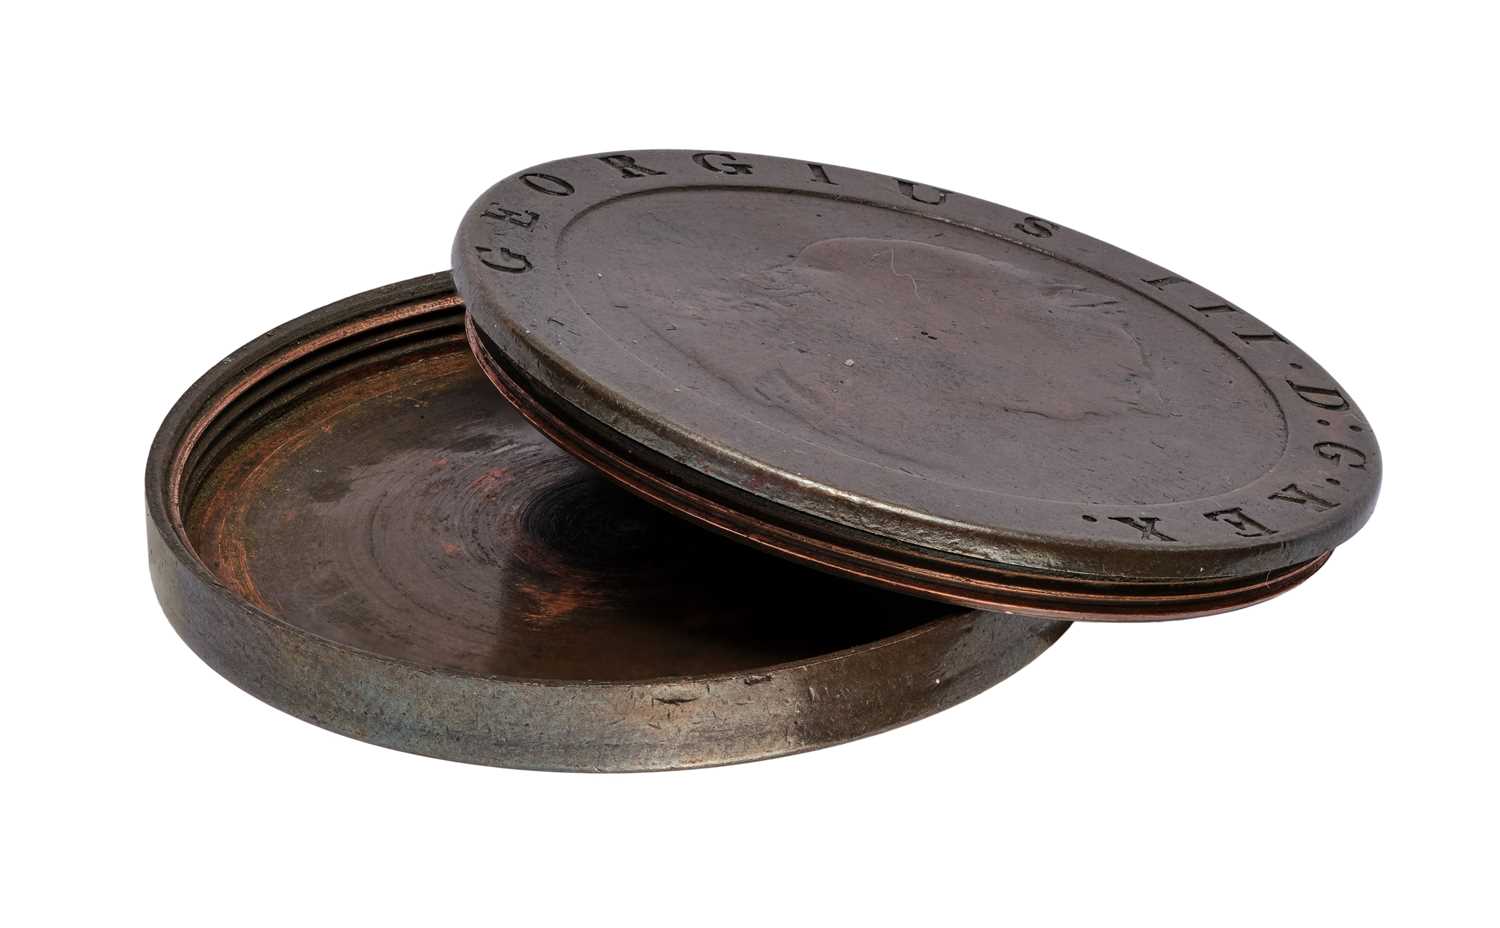 George III, 'Cartwheel' Twopence Smuggler's Box; coin hollowed out for concealment, with two